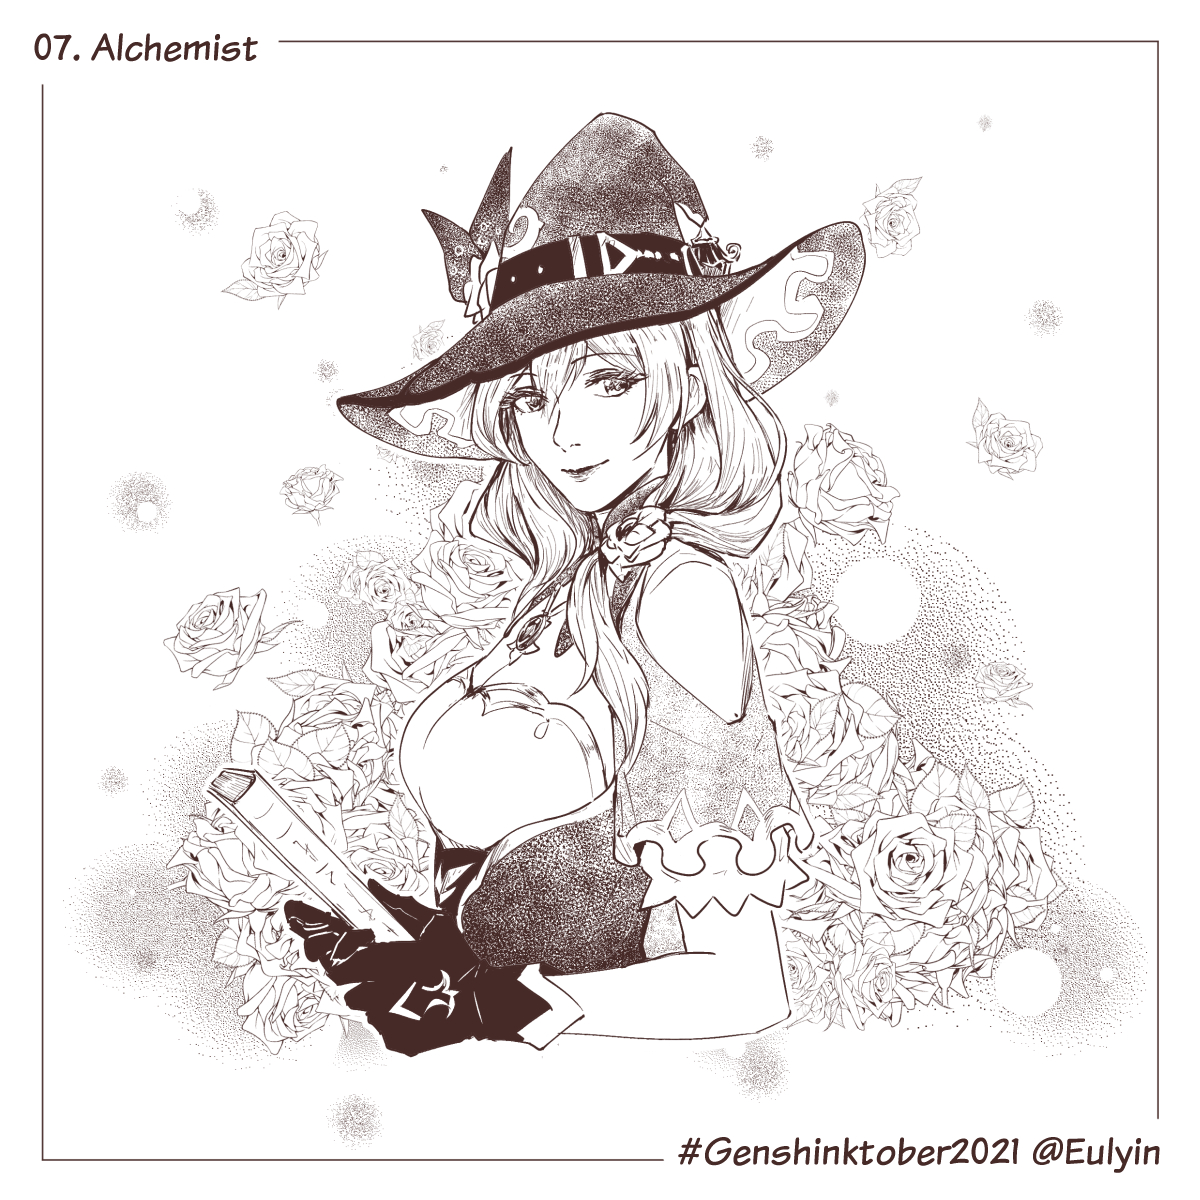 [Day 07 Alchemist]
--

Lisa is an alchemist too right XD
I do like the character, but sad, her kit in the game doesn't really suit me 🥲 